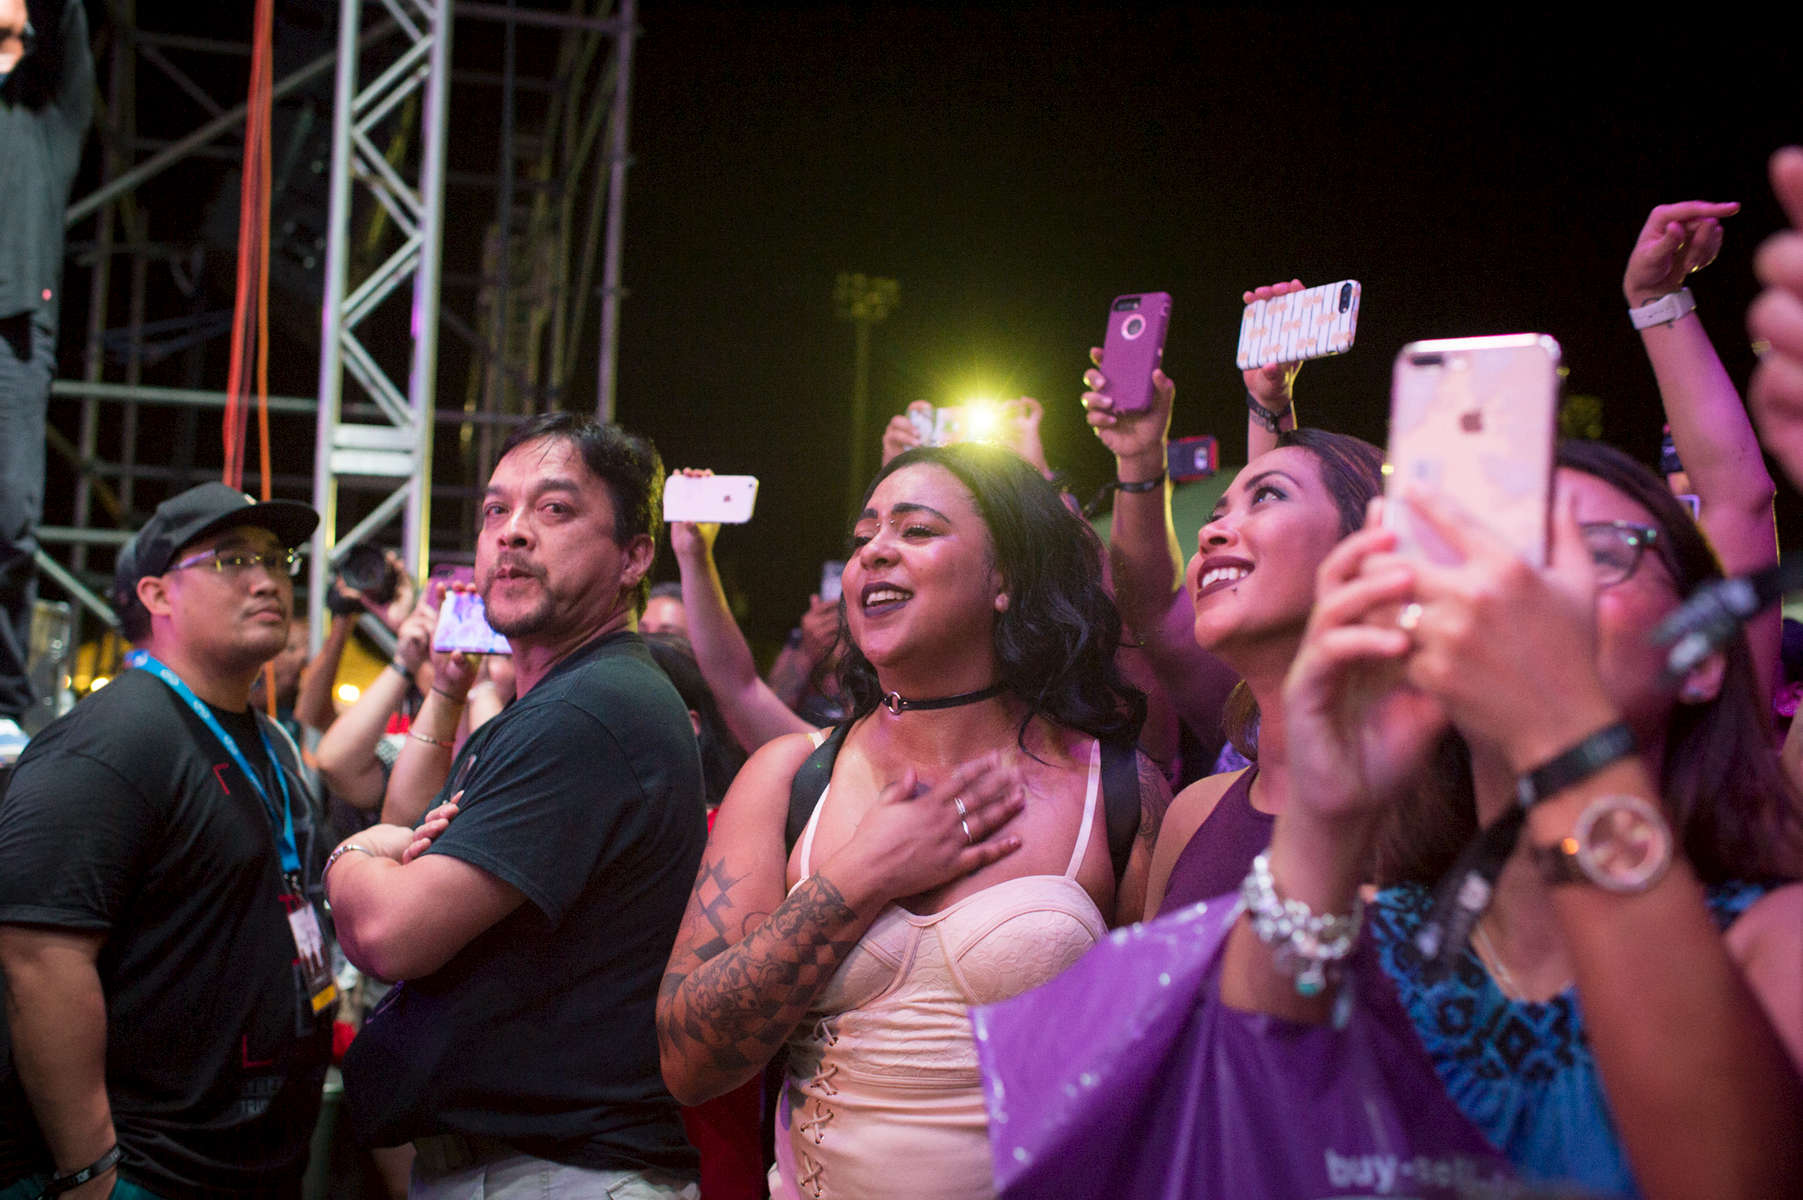 The fans were celebrating all through the night during the Boyz II Men concert at the Paseo Stadium on Guam. (Dec. 15, 2017)Photo by Nancy Borowick